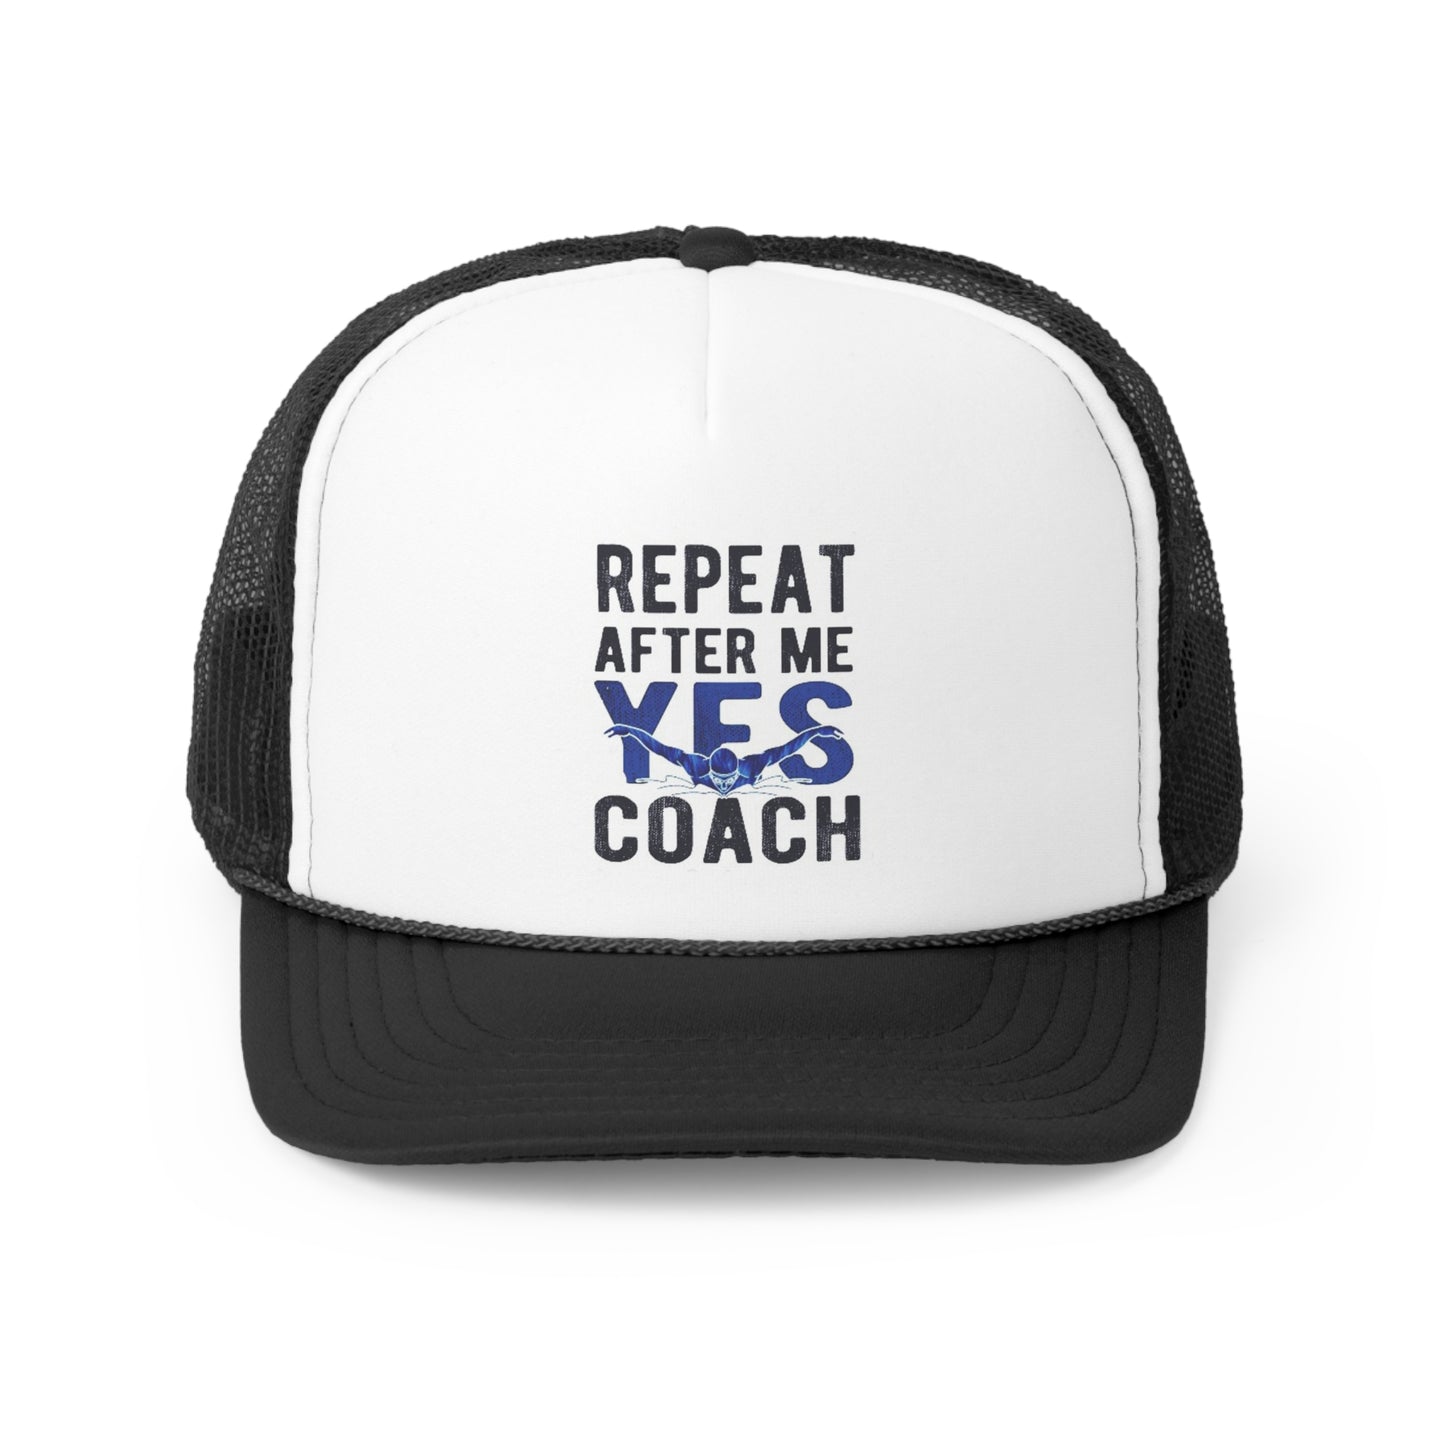 Yes Coach! Hat